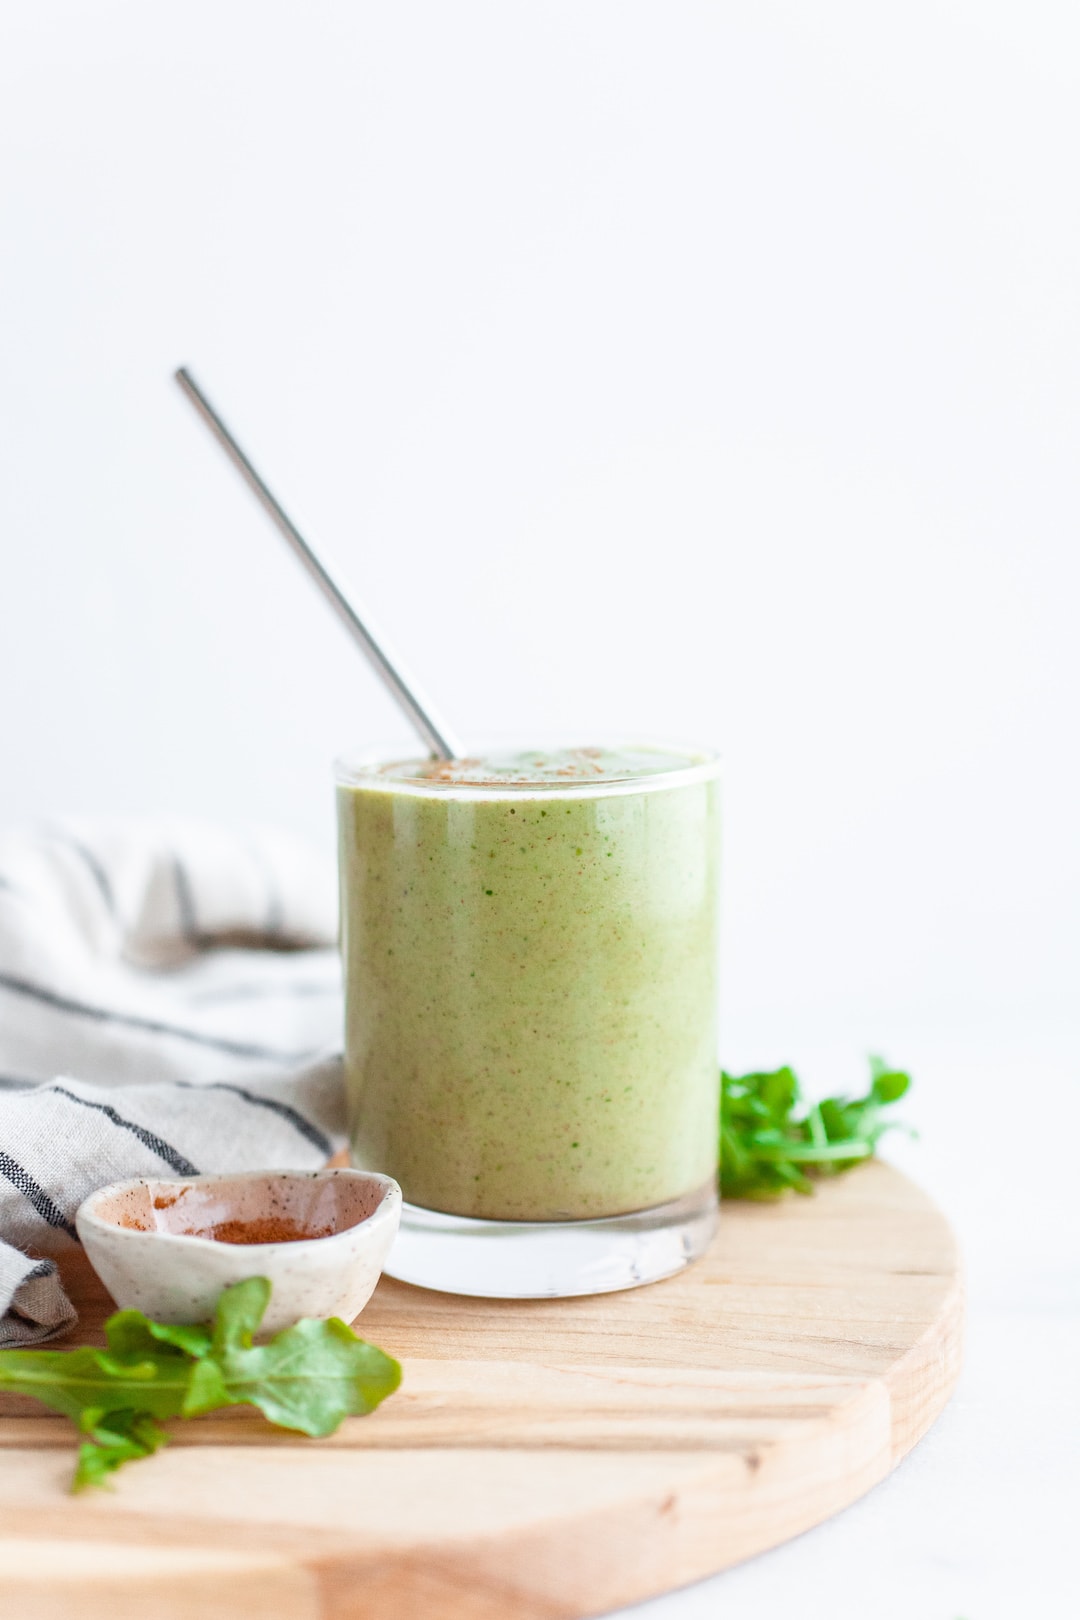 Delicious Arugula Smoothie Recipe in a glass with a metal straw